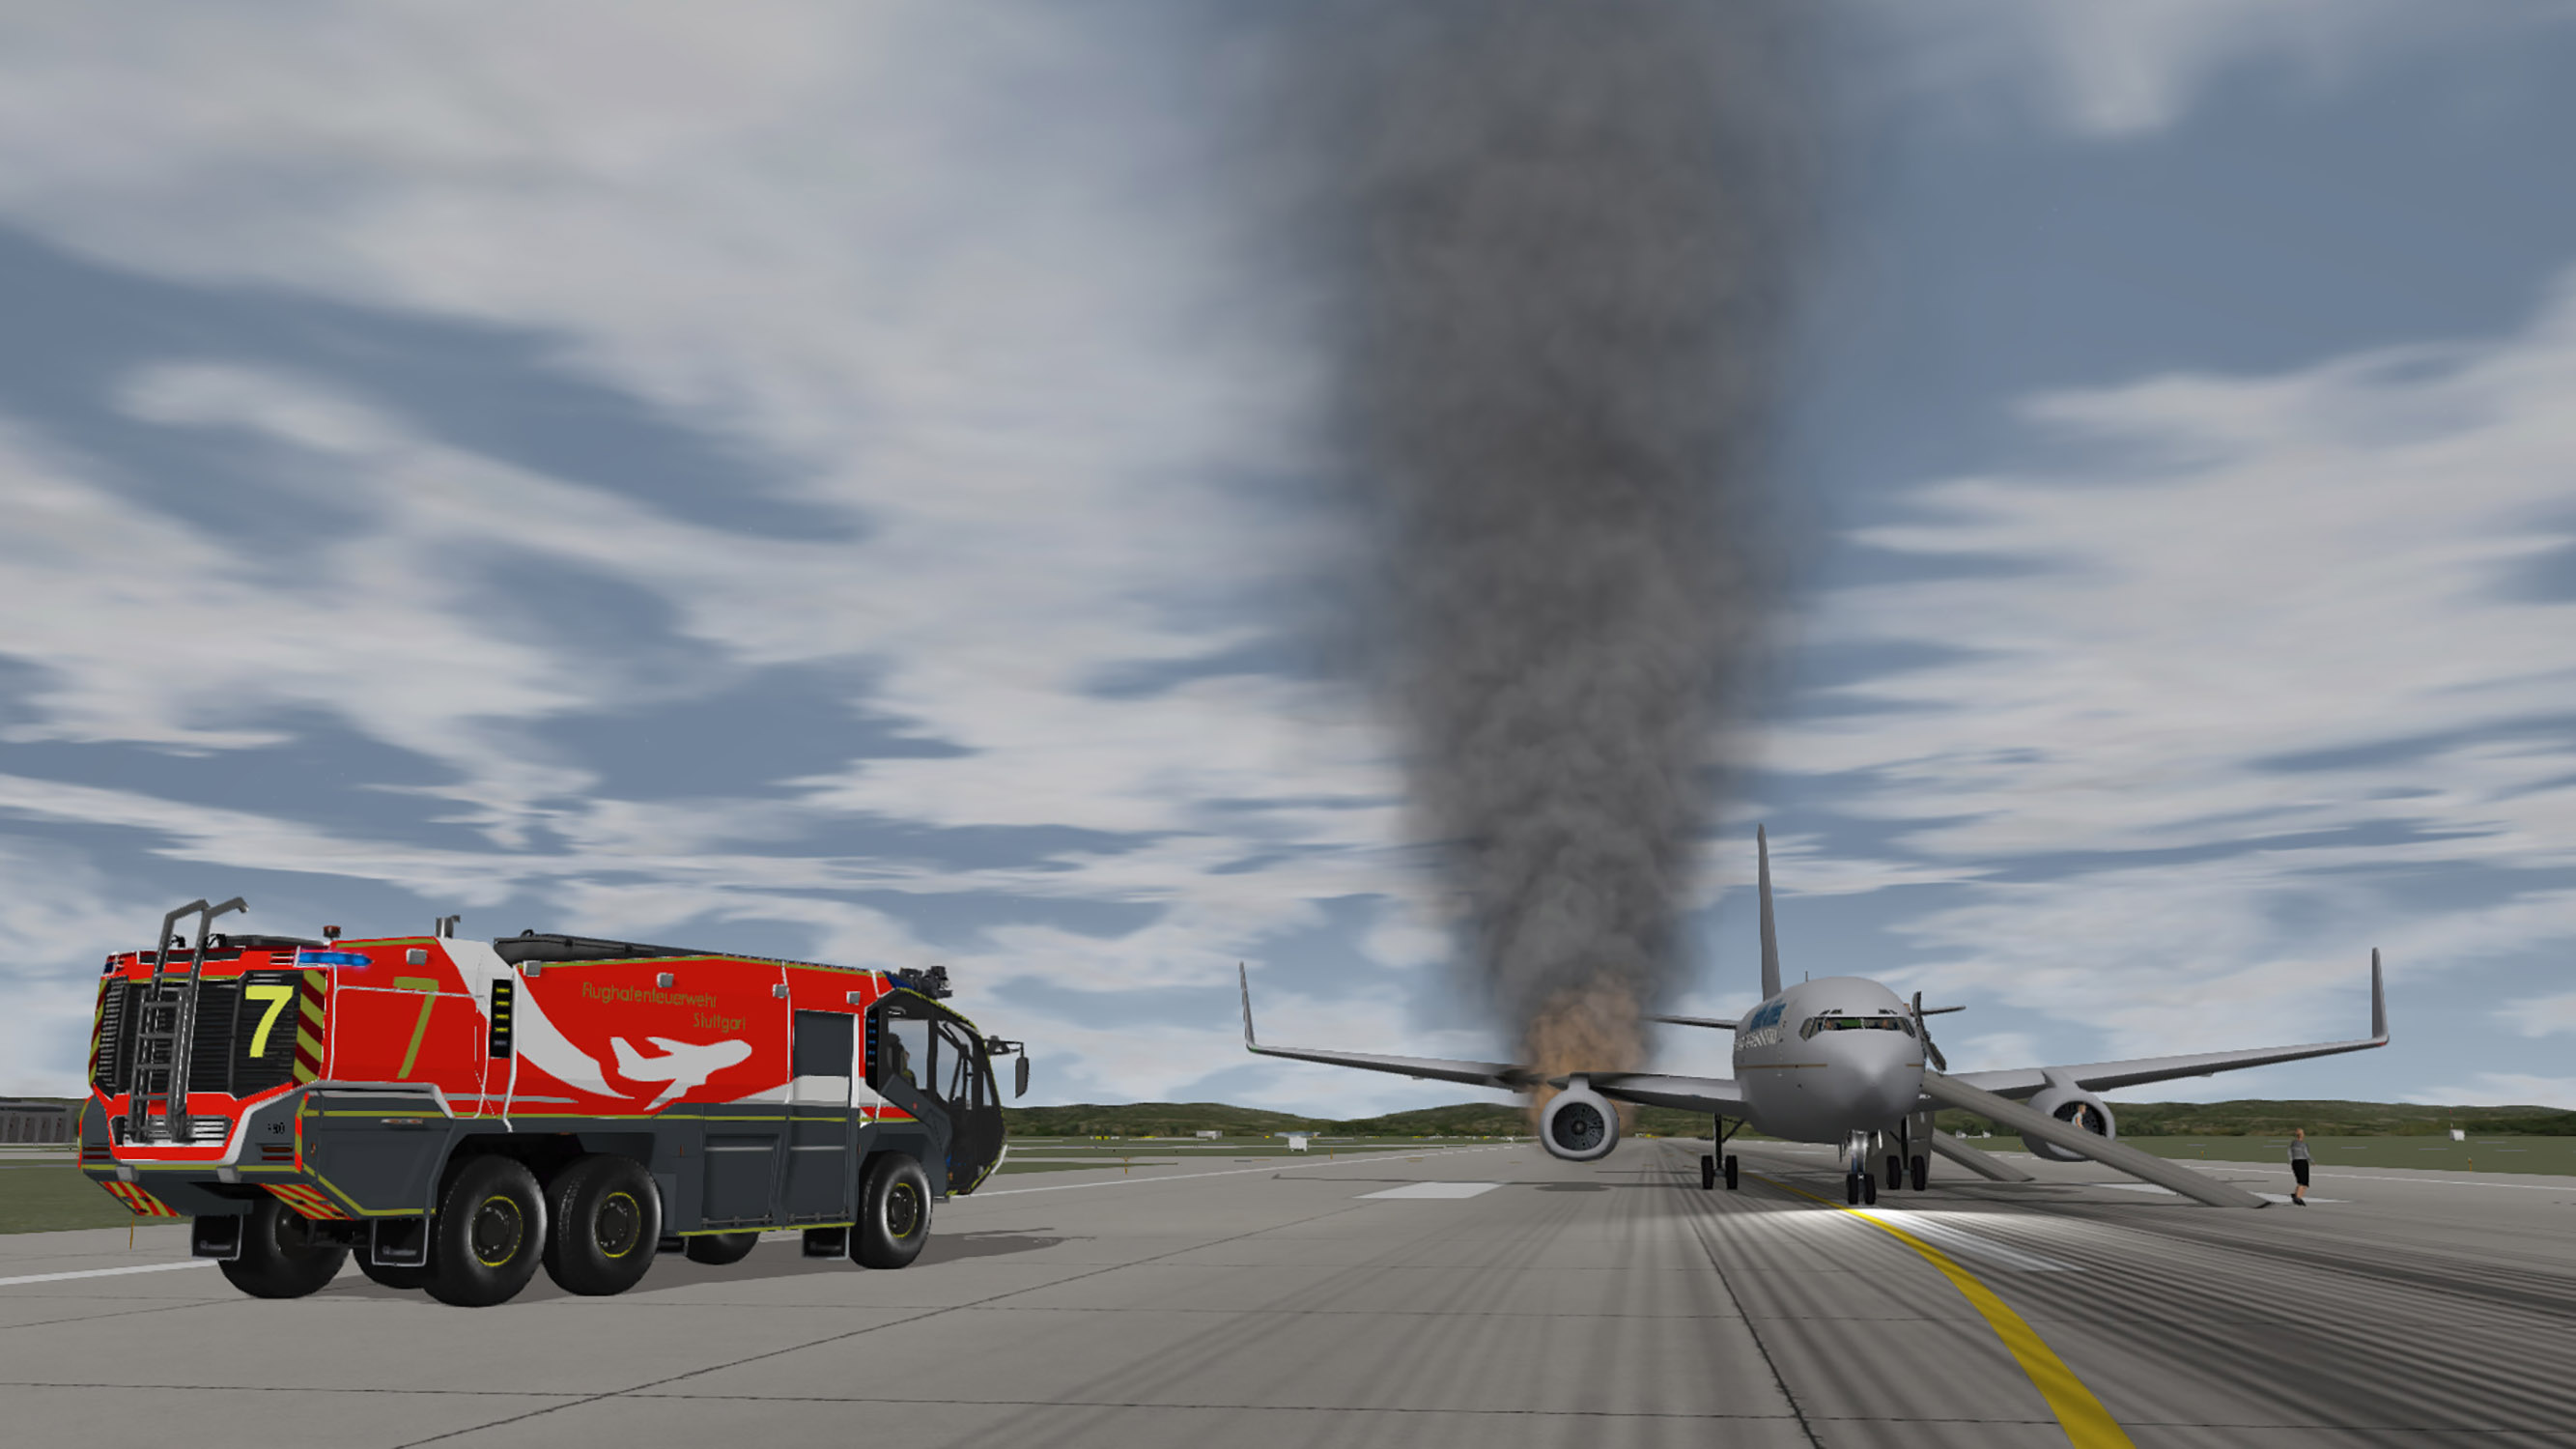 ARFF truck on scene of an aircraft engine fire with passengers evacuation on the runway.